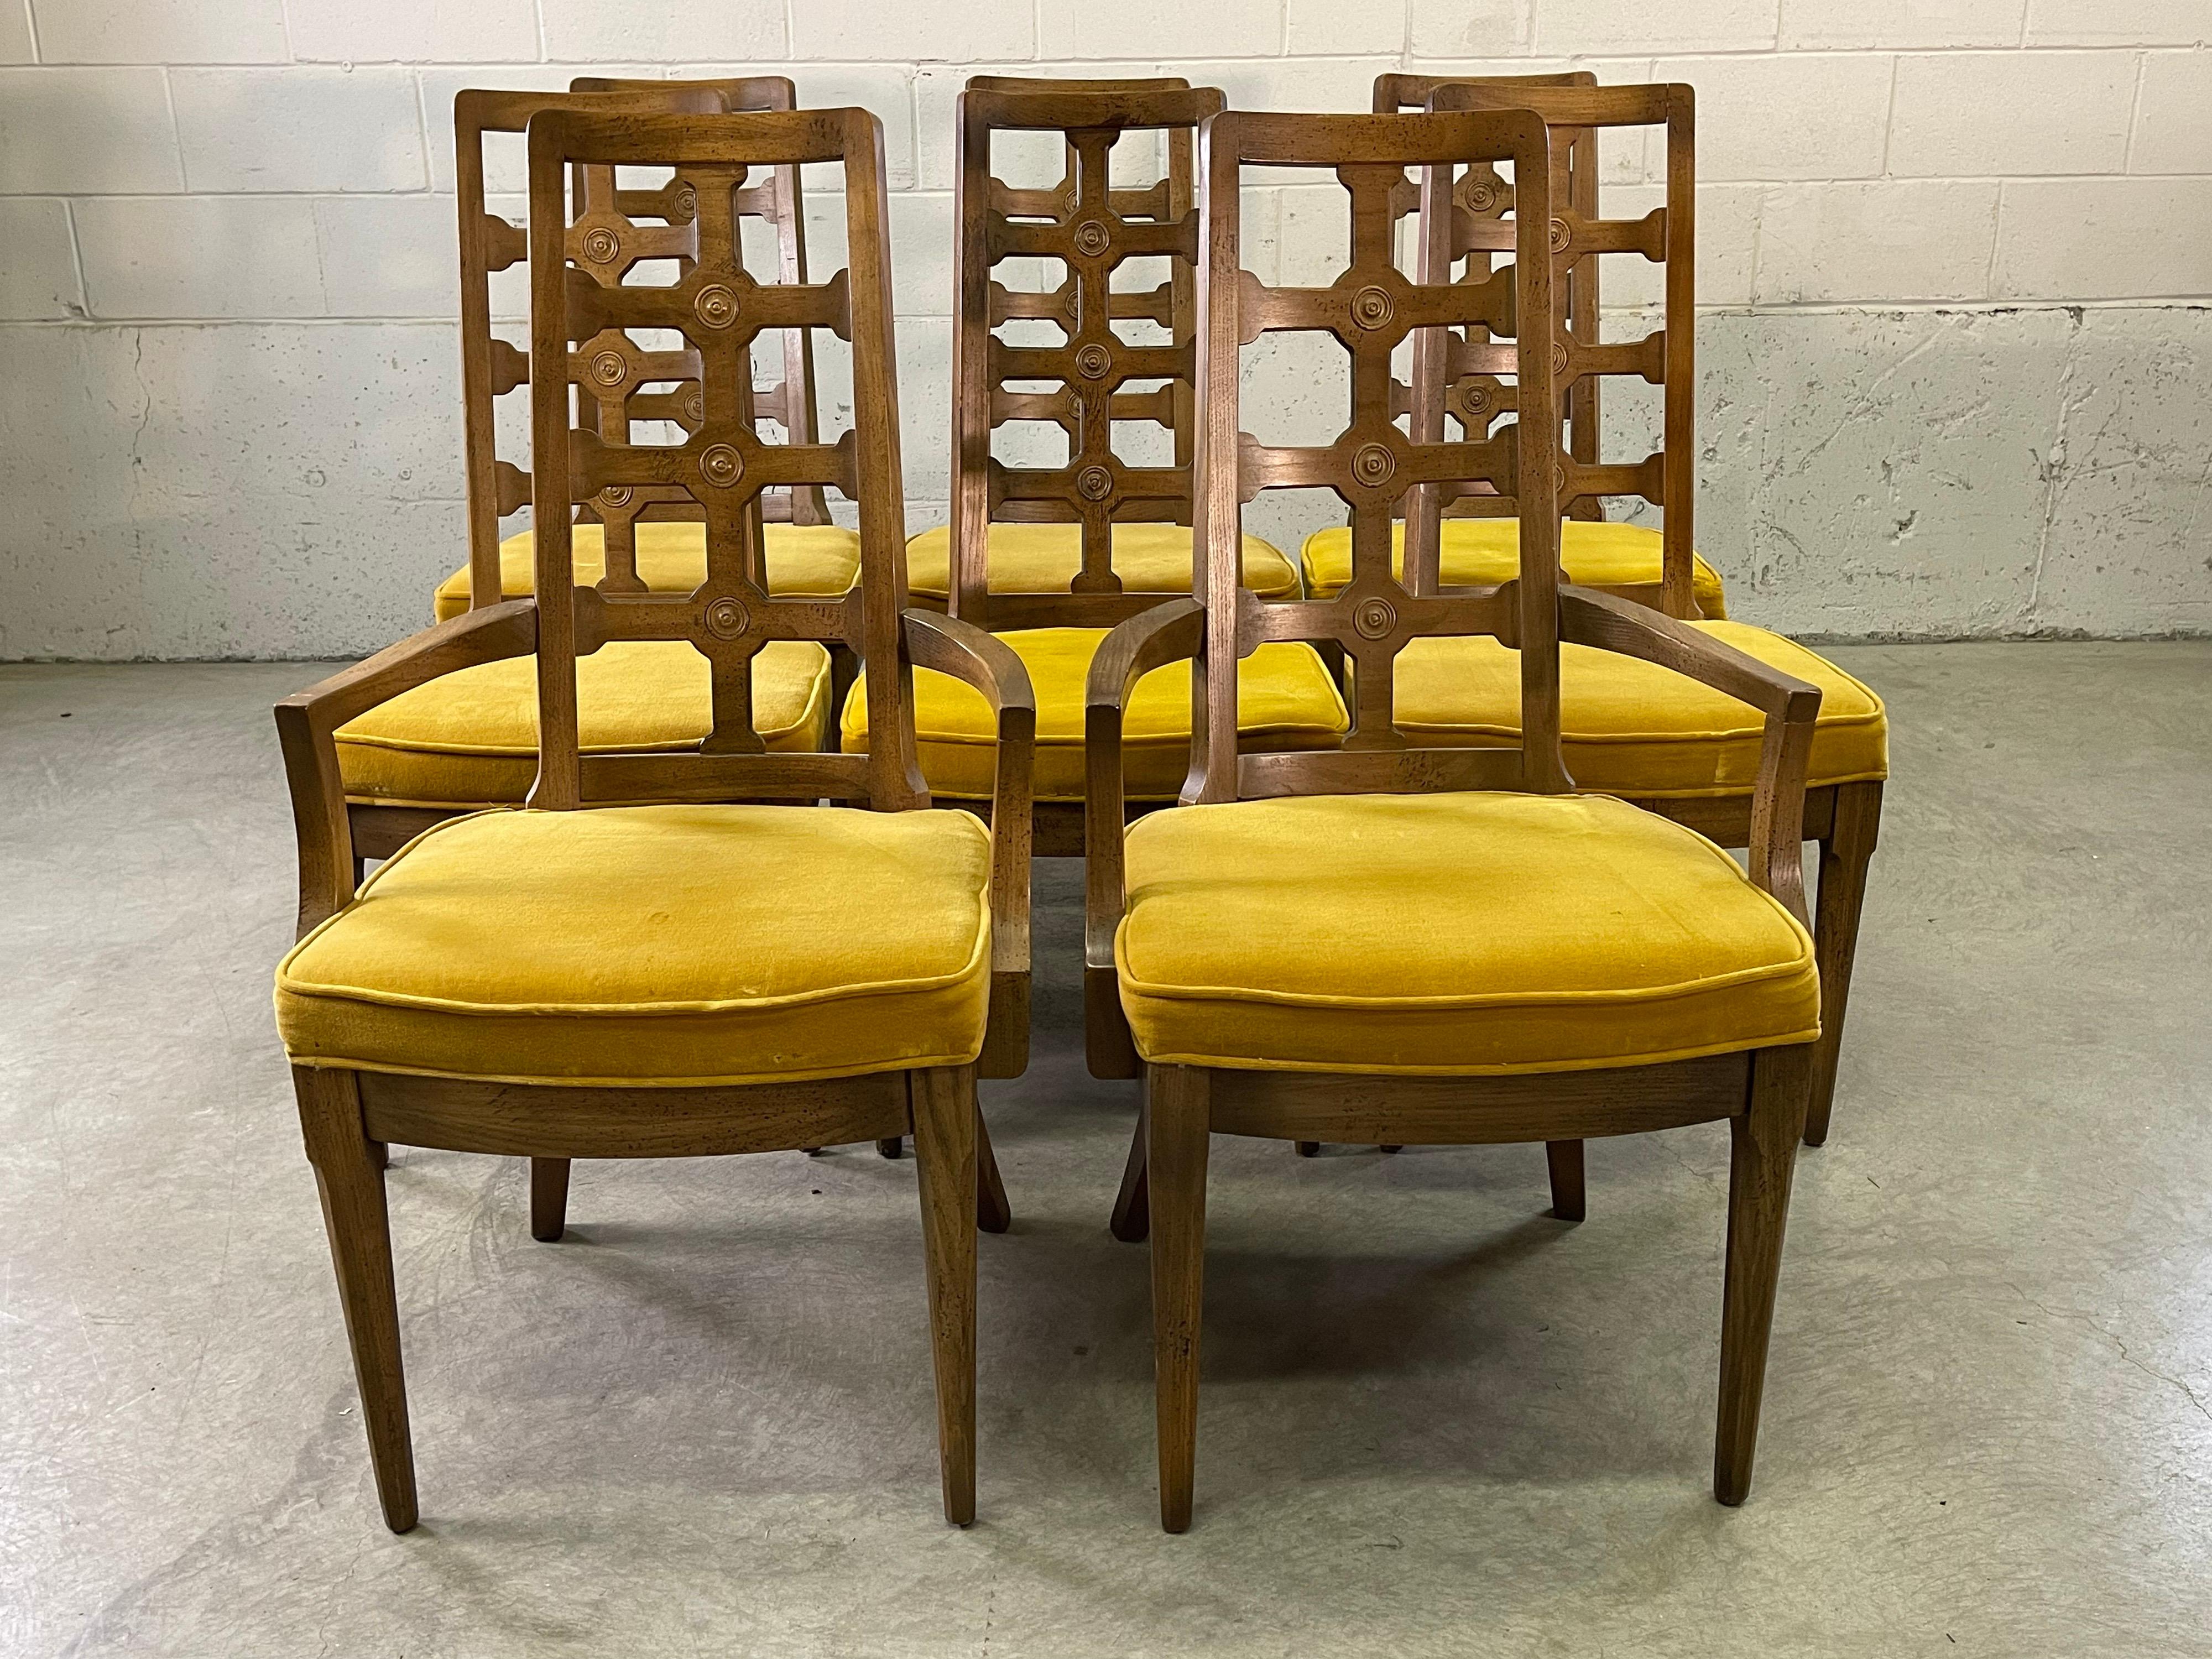 1960s Dining Table with 8 Chairs 2